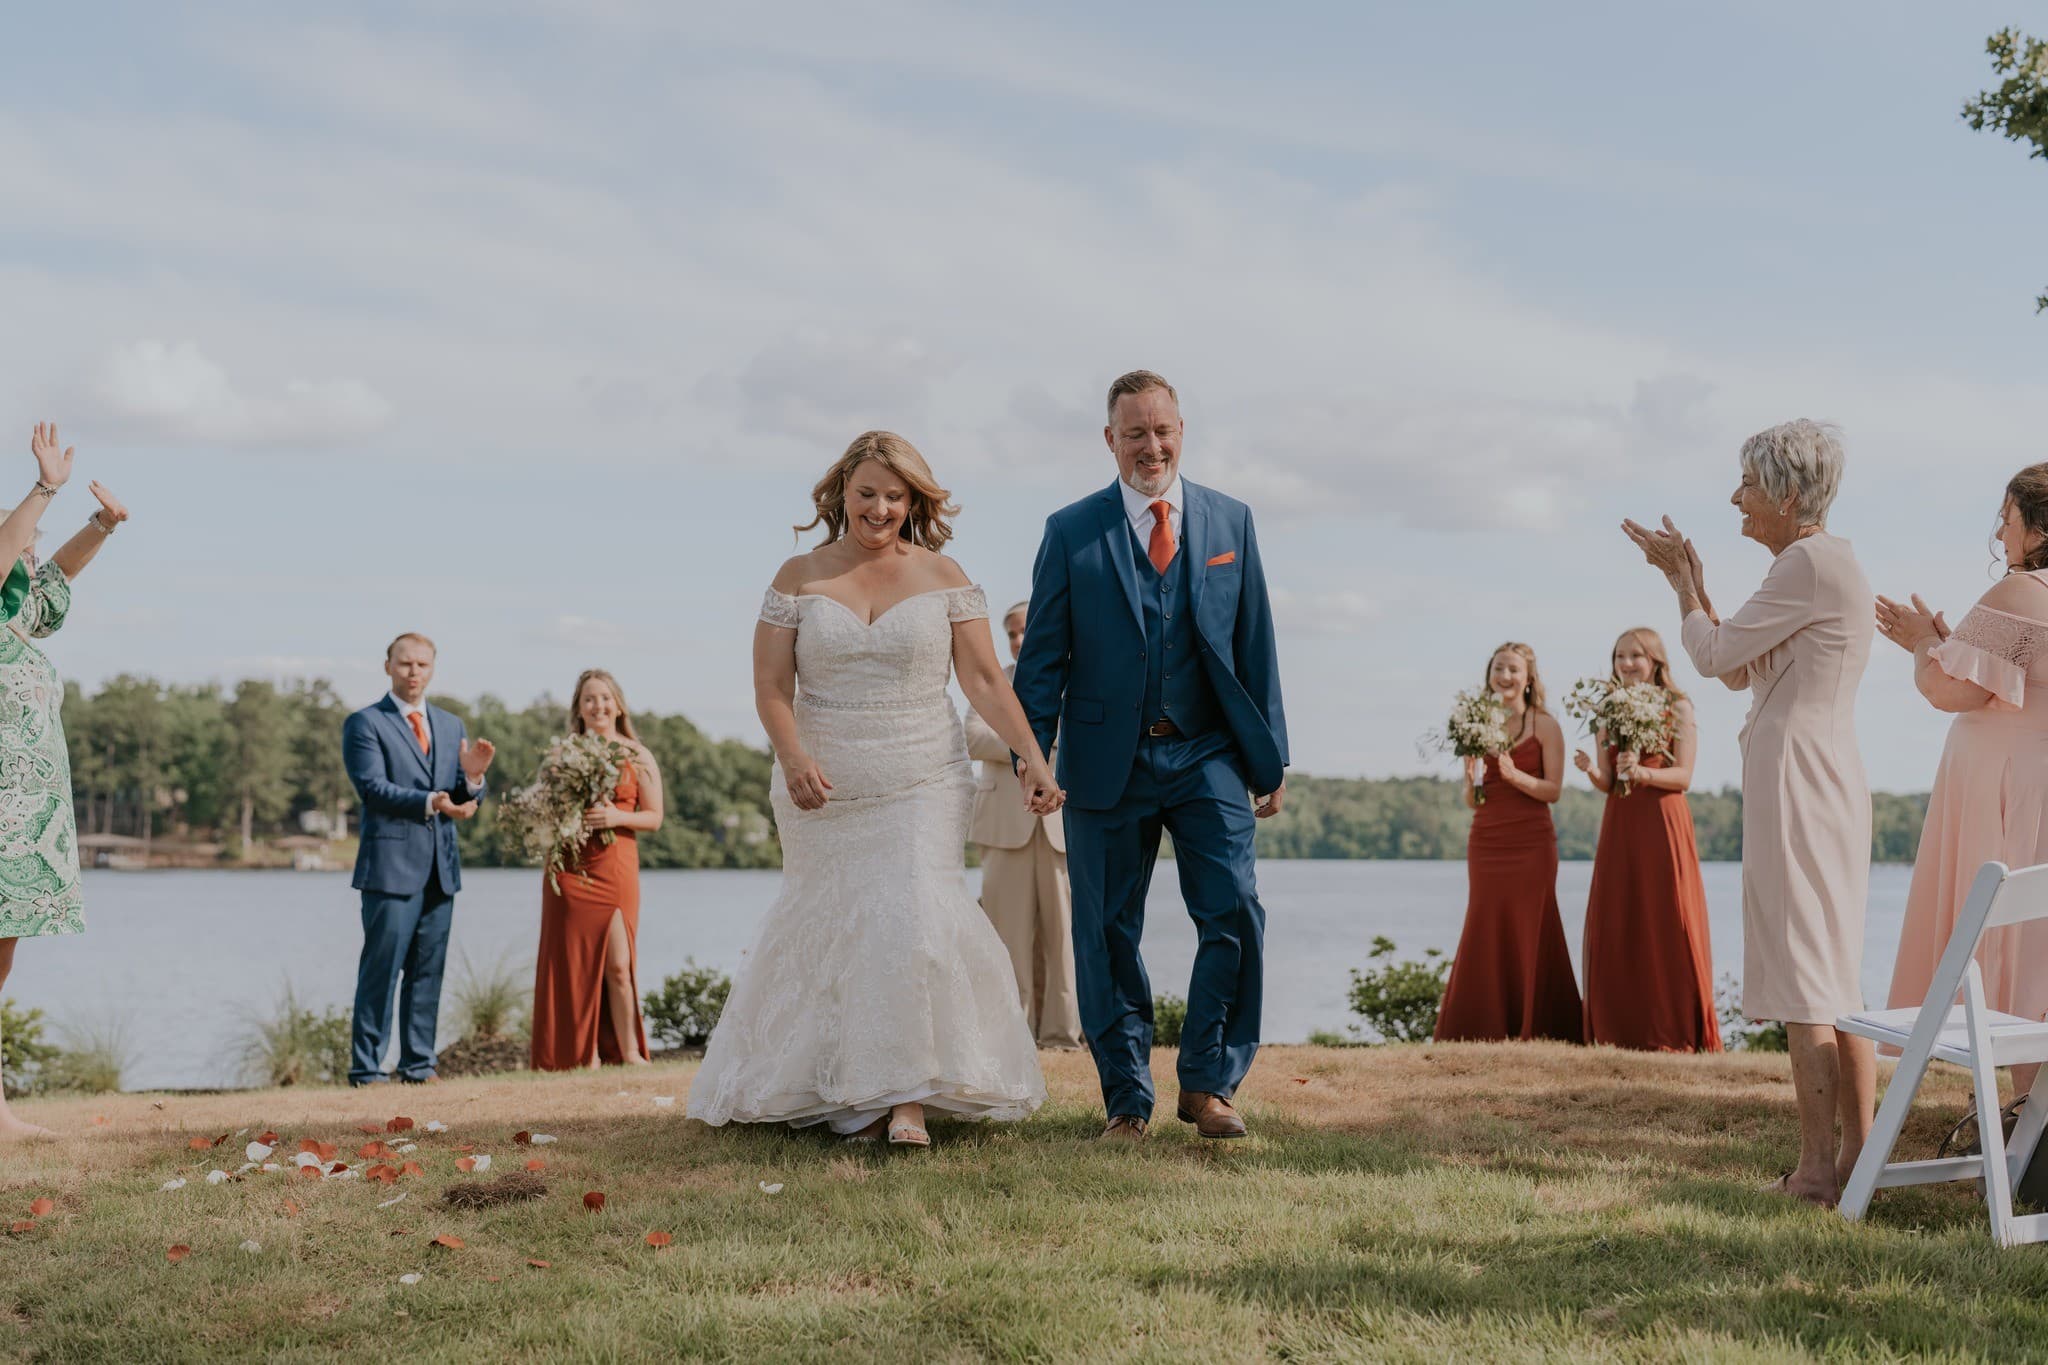 An Unforgettable Out-of-State Wedding Experience with Stephanie and David